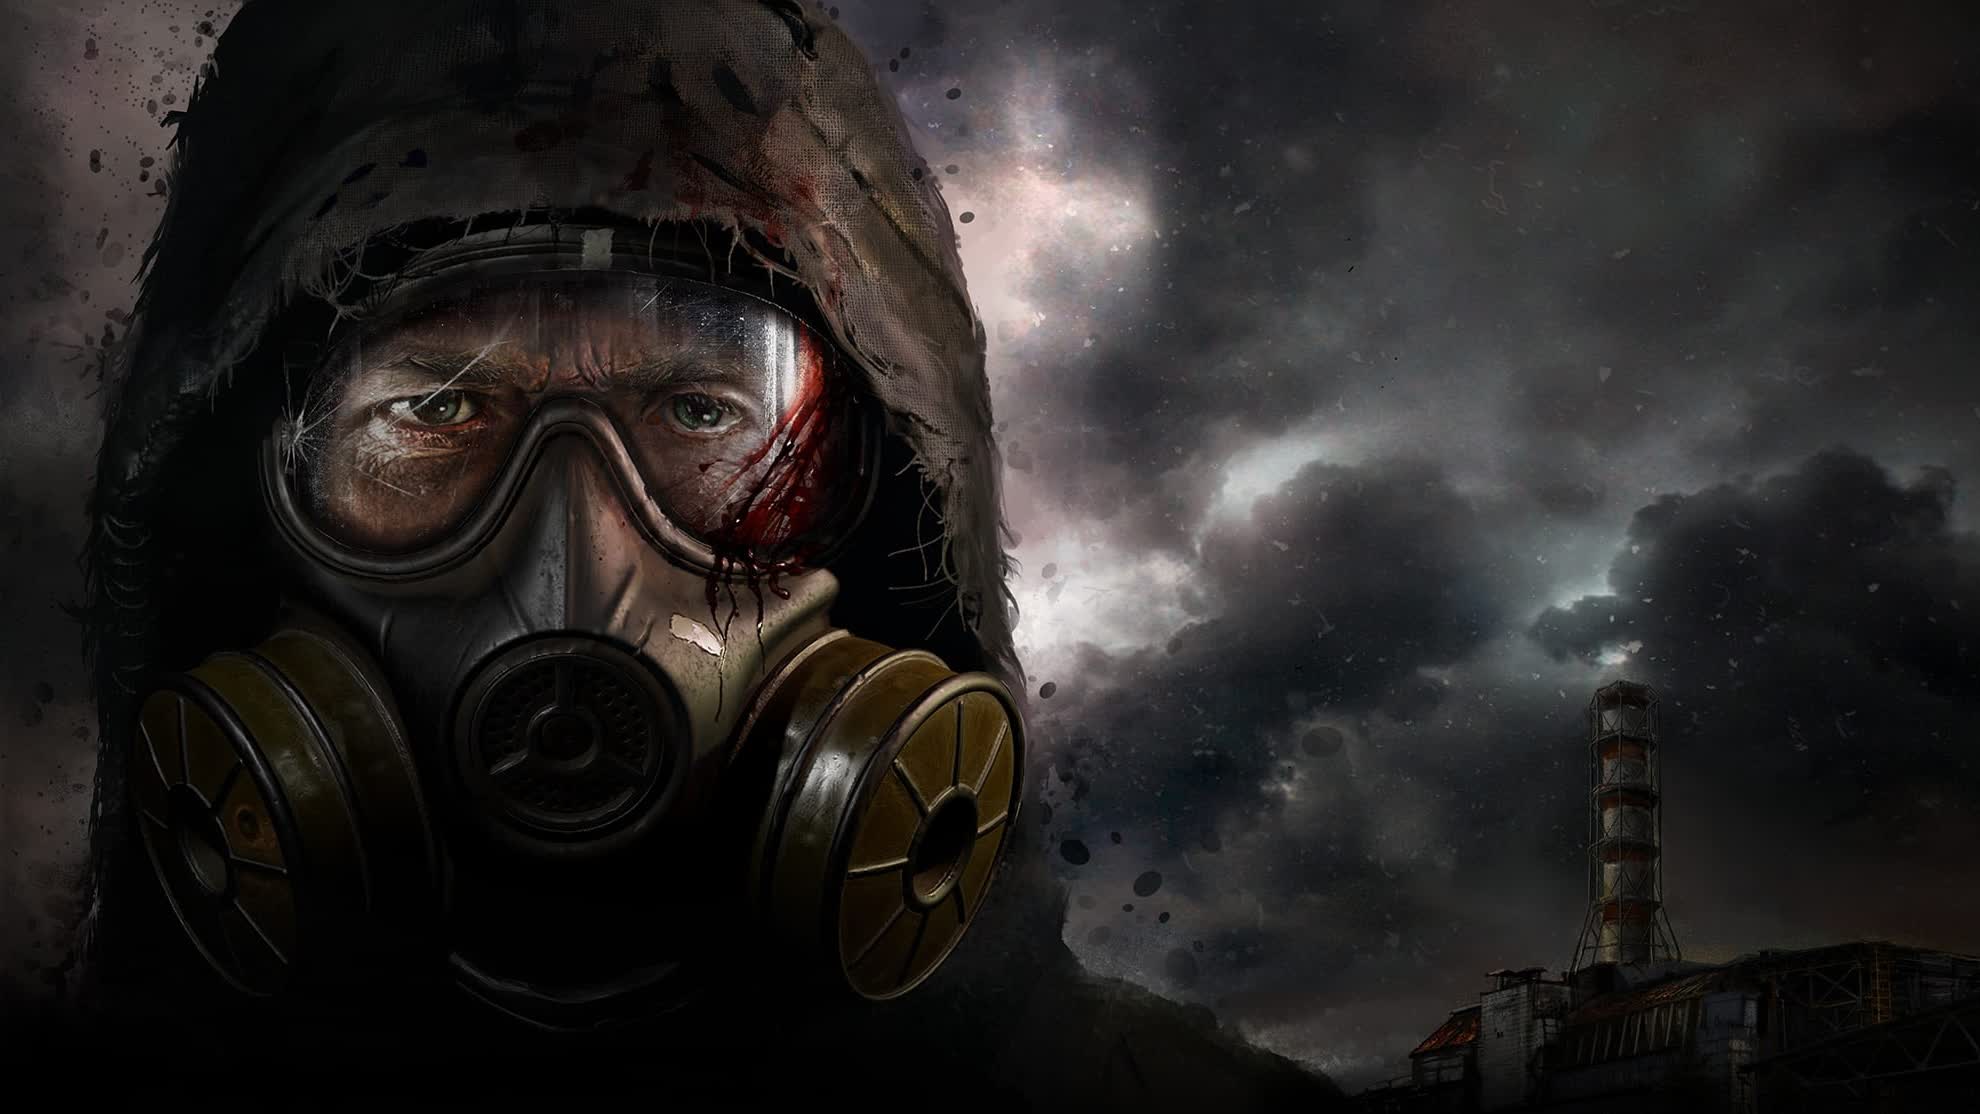 Stalker 2 developer says it needs an extra seven months to finish the game